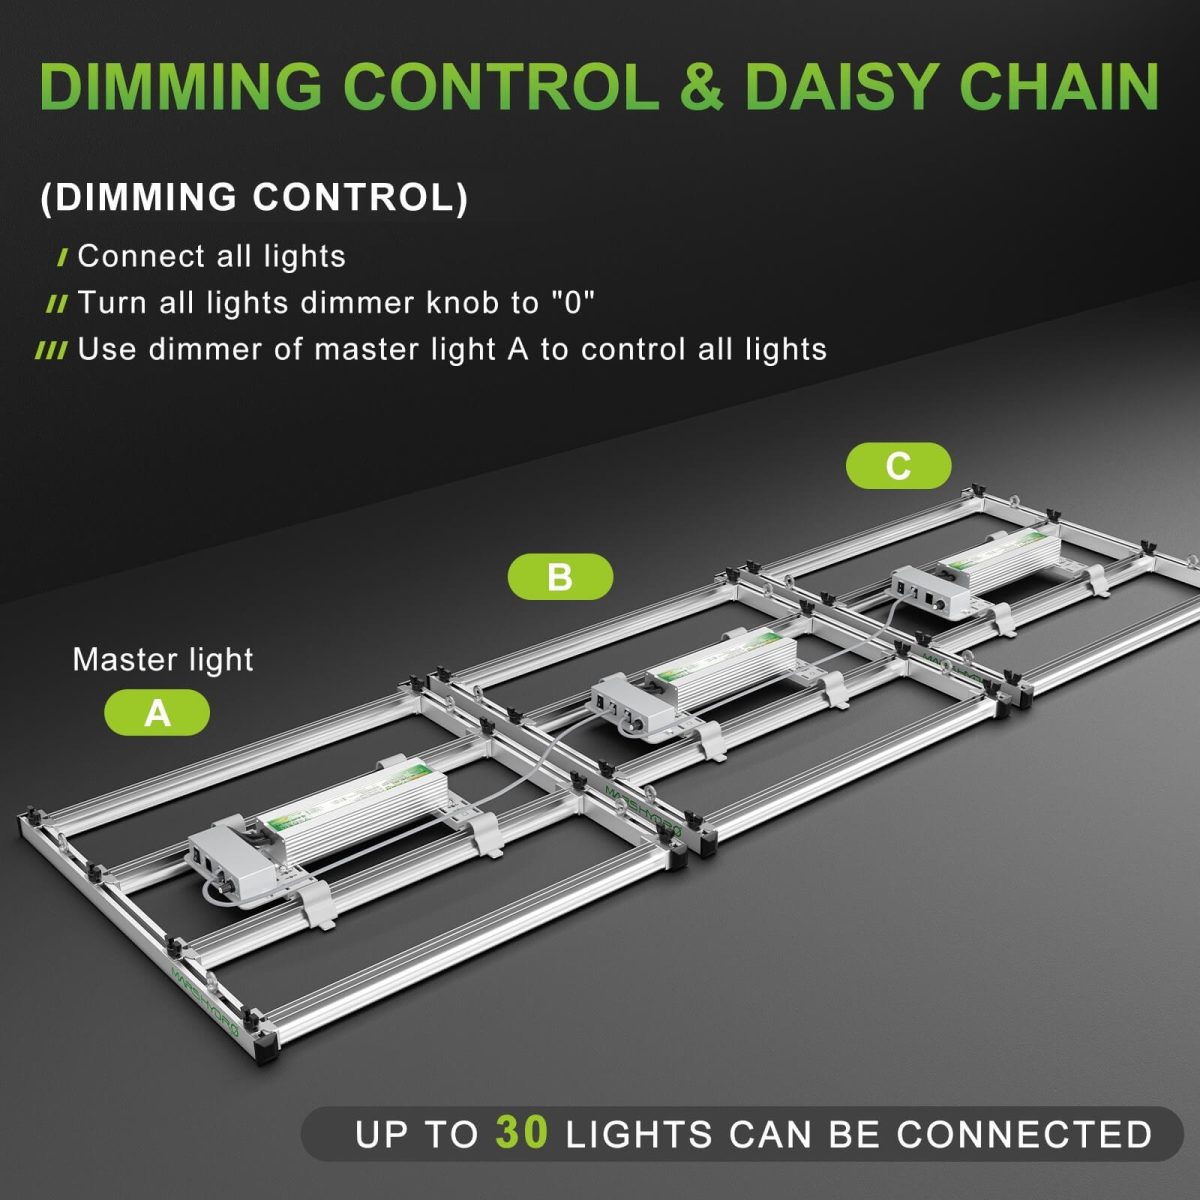 FC-E3000 LED grow lights support dimming daisy chain function to adjust light intensity of up to 30 LEDs with one dimmer.